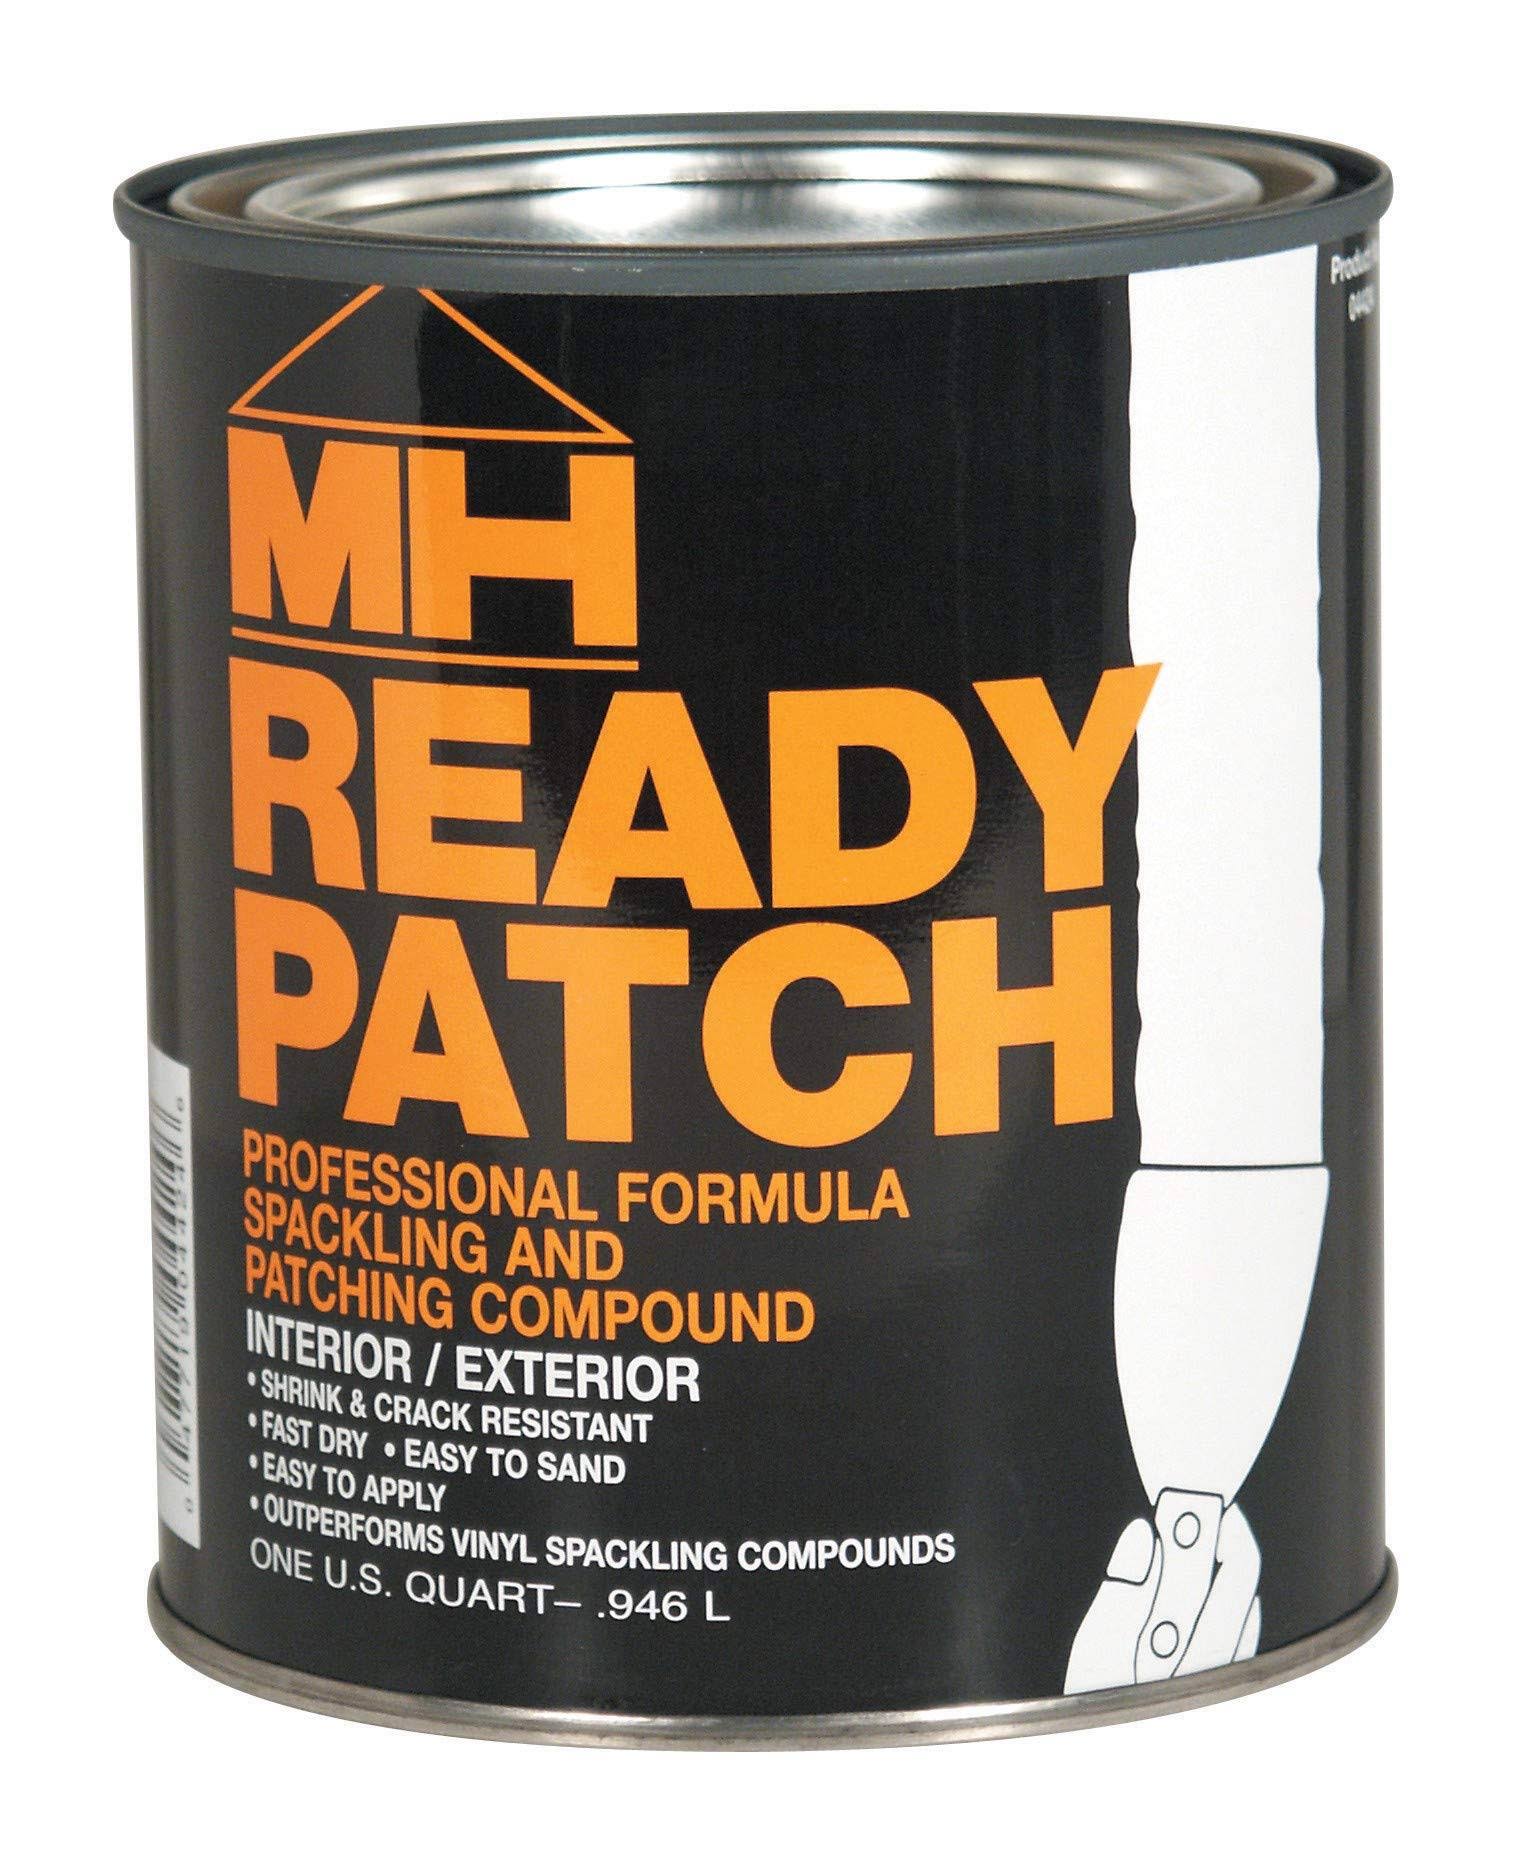 Zinsser Ready Patch Spackling & Patching Compound - 946ml